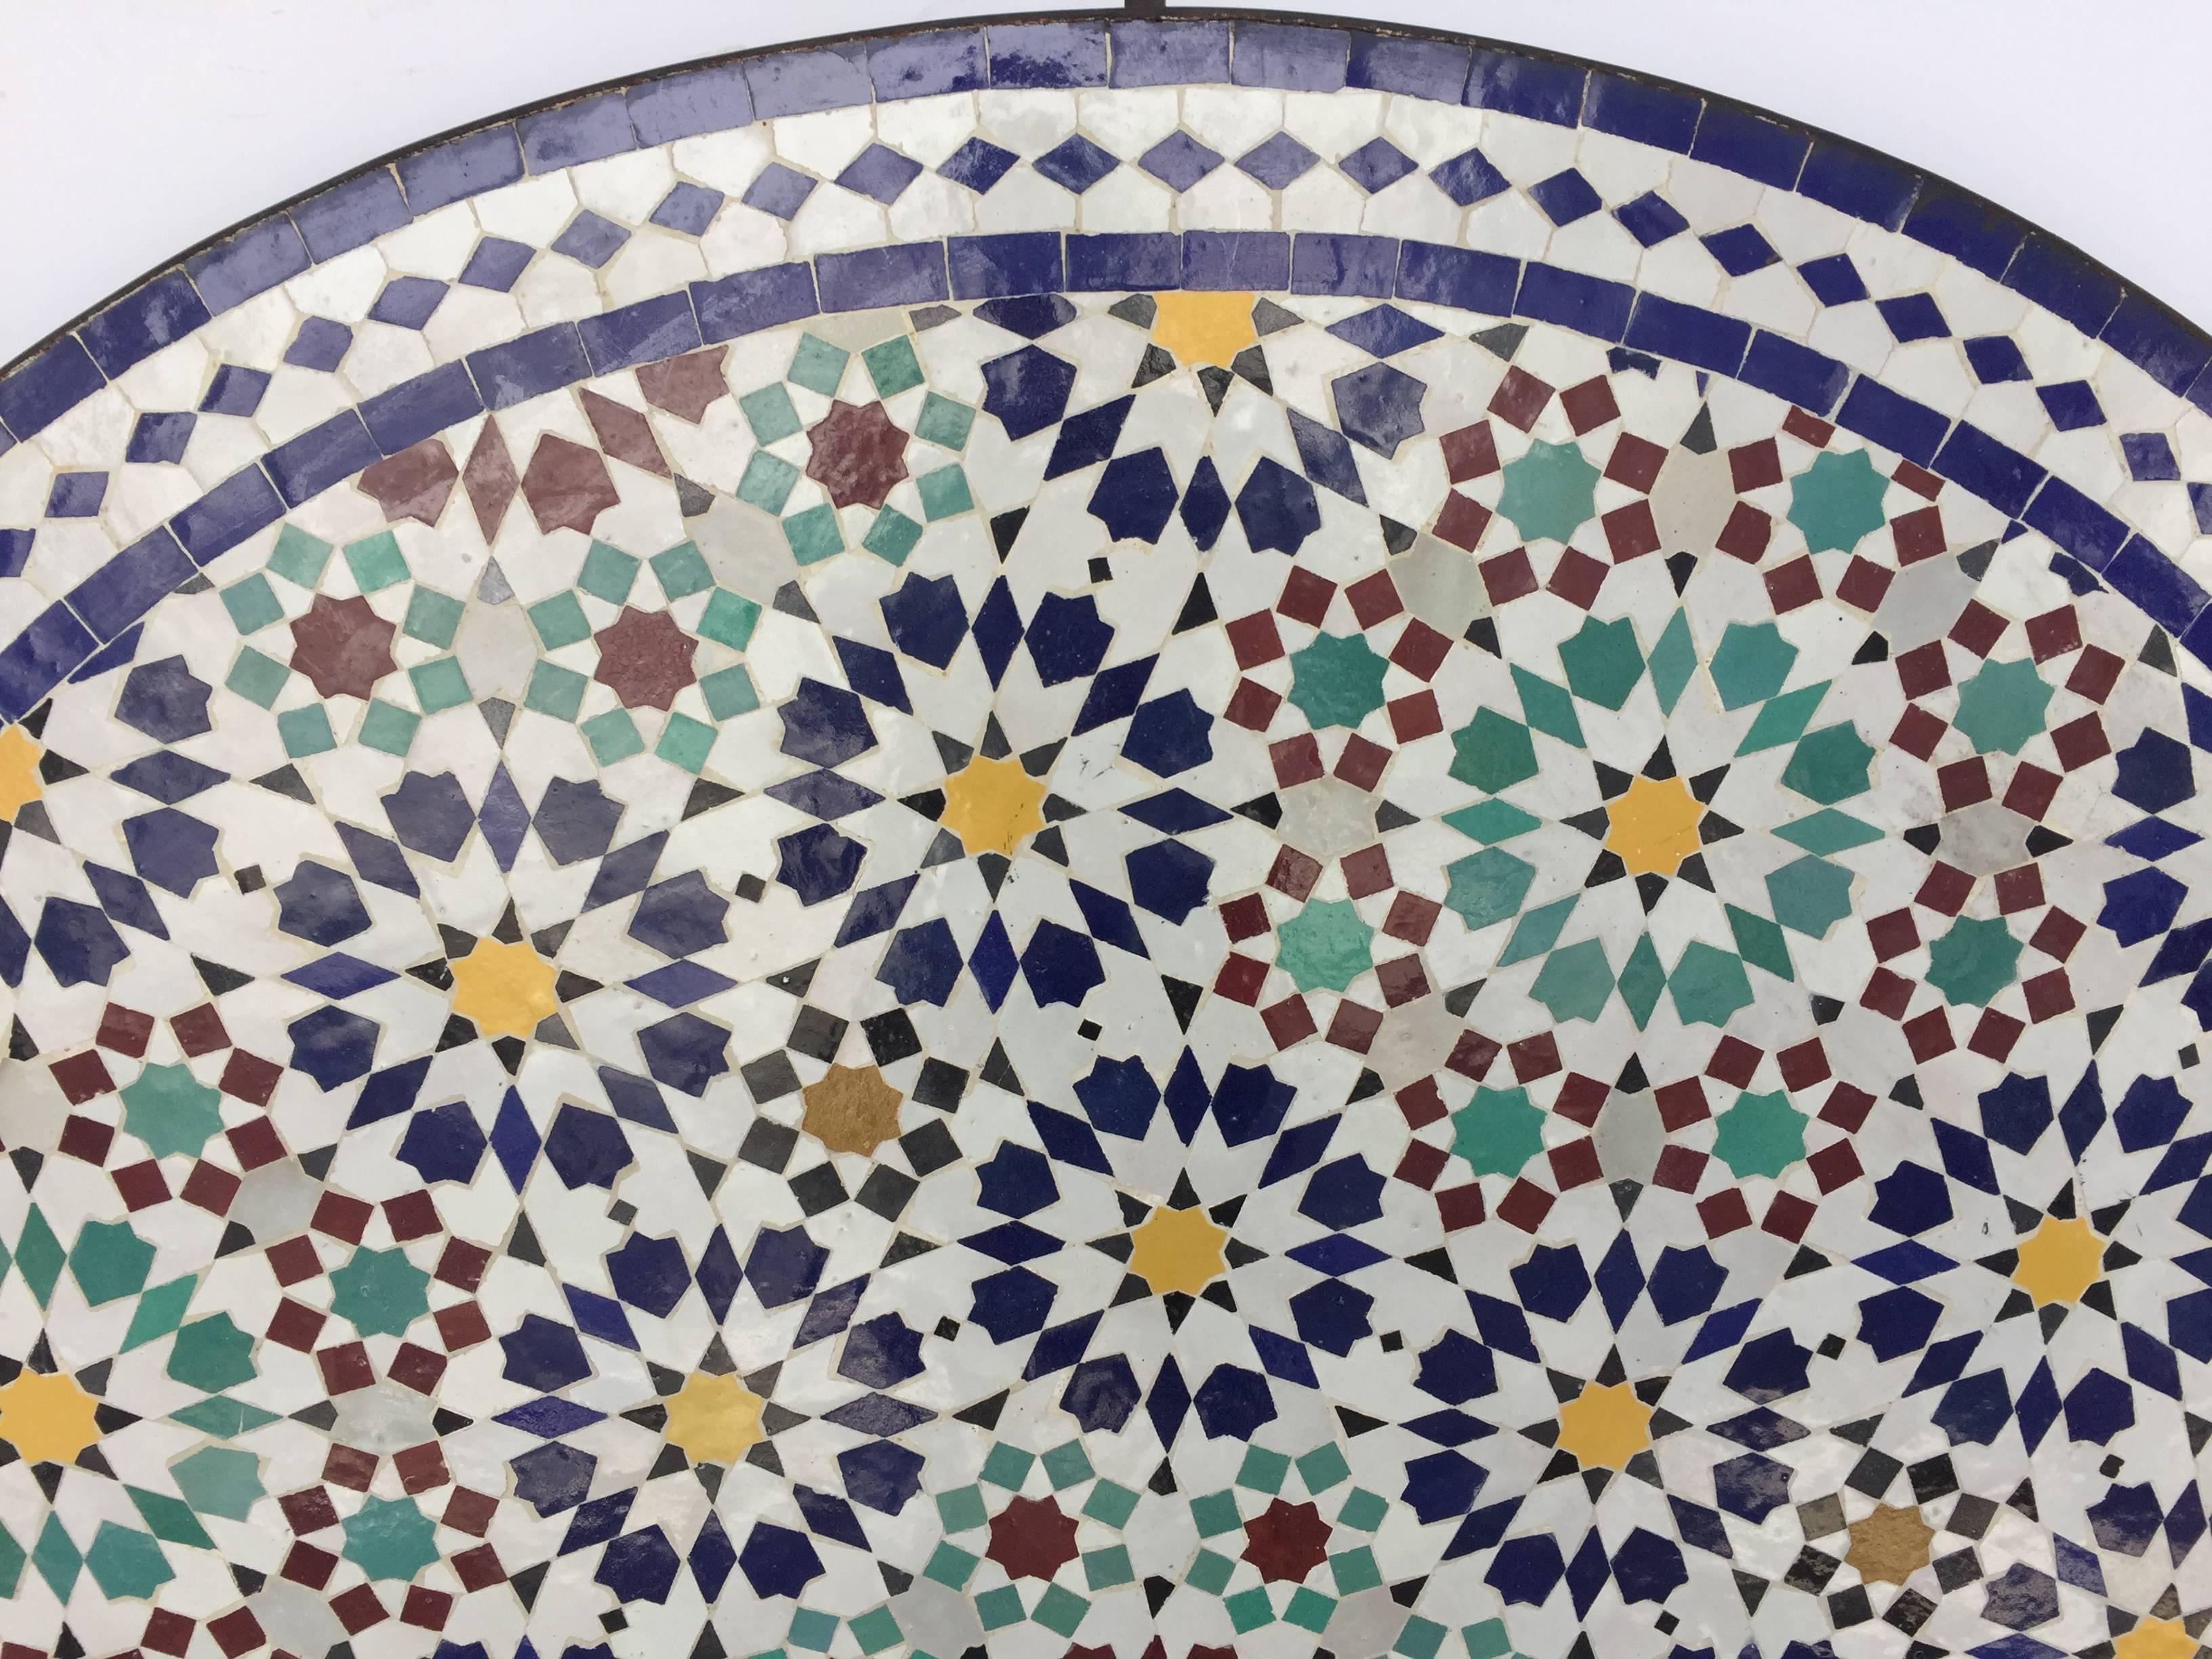 Moroccan Round Mosaic Outdoor Tile Table in Fez Moorish Design In Good Condition For Sale In North Hollywood, CA